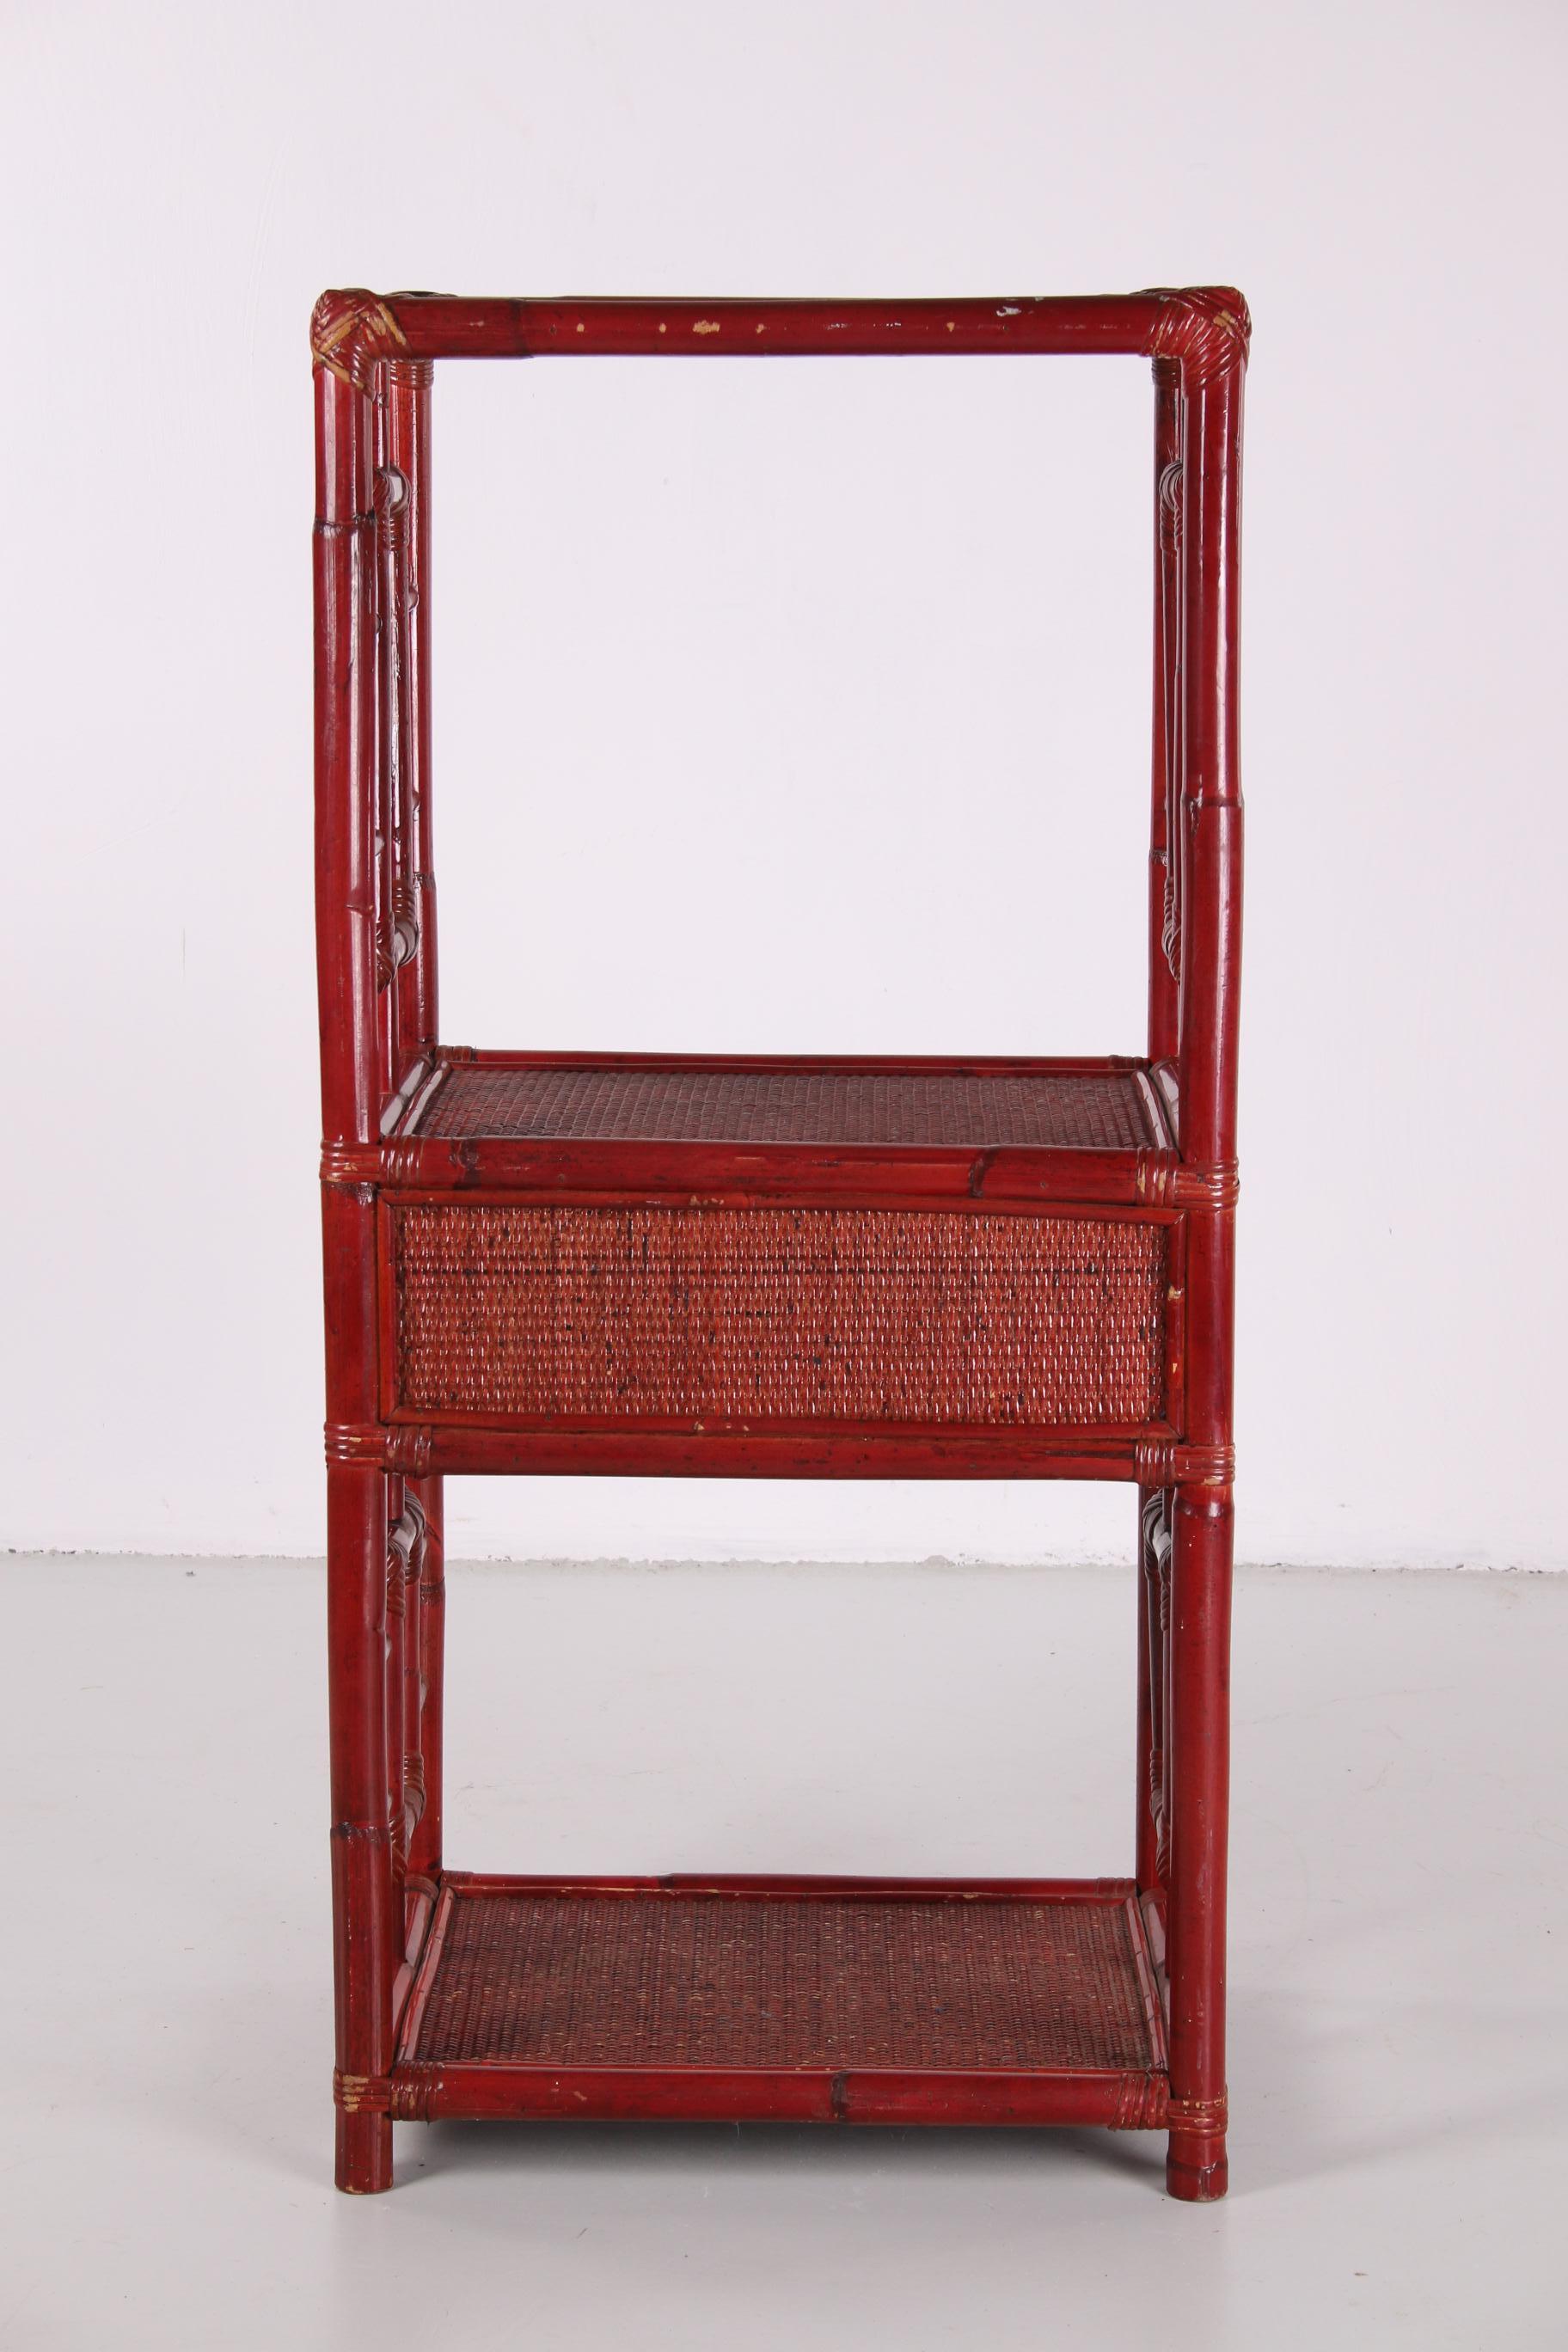 Chinese 19th Century Etagere or Room Divider Made of Bamboo, Old Red 1